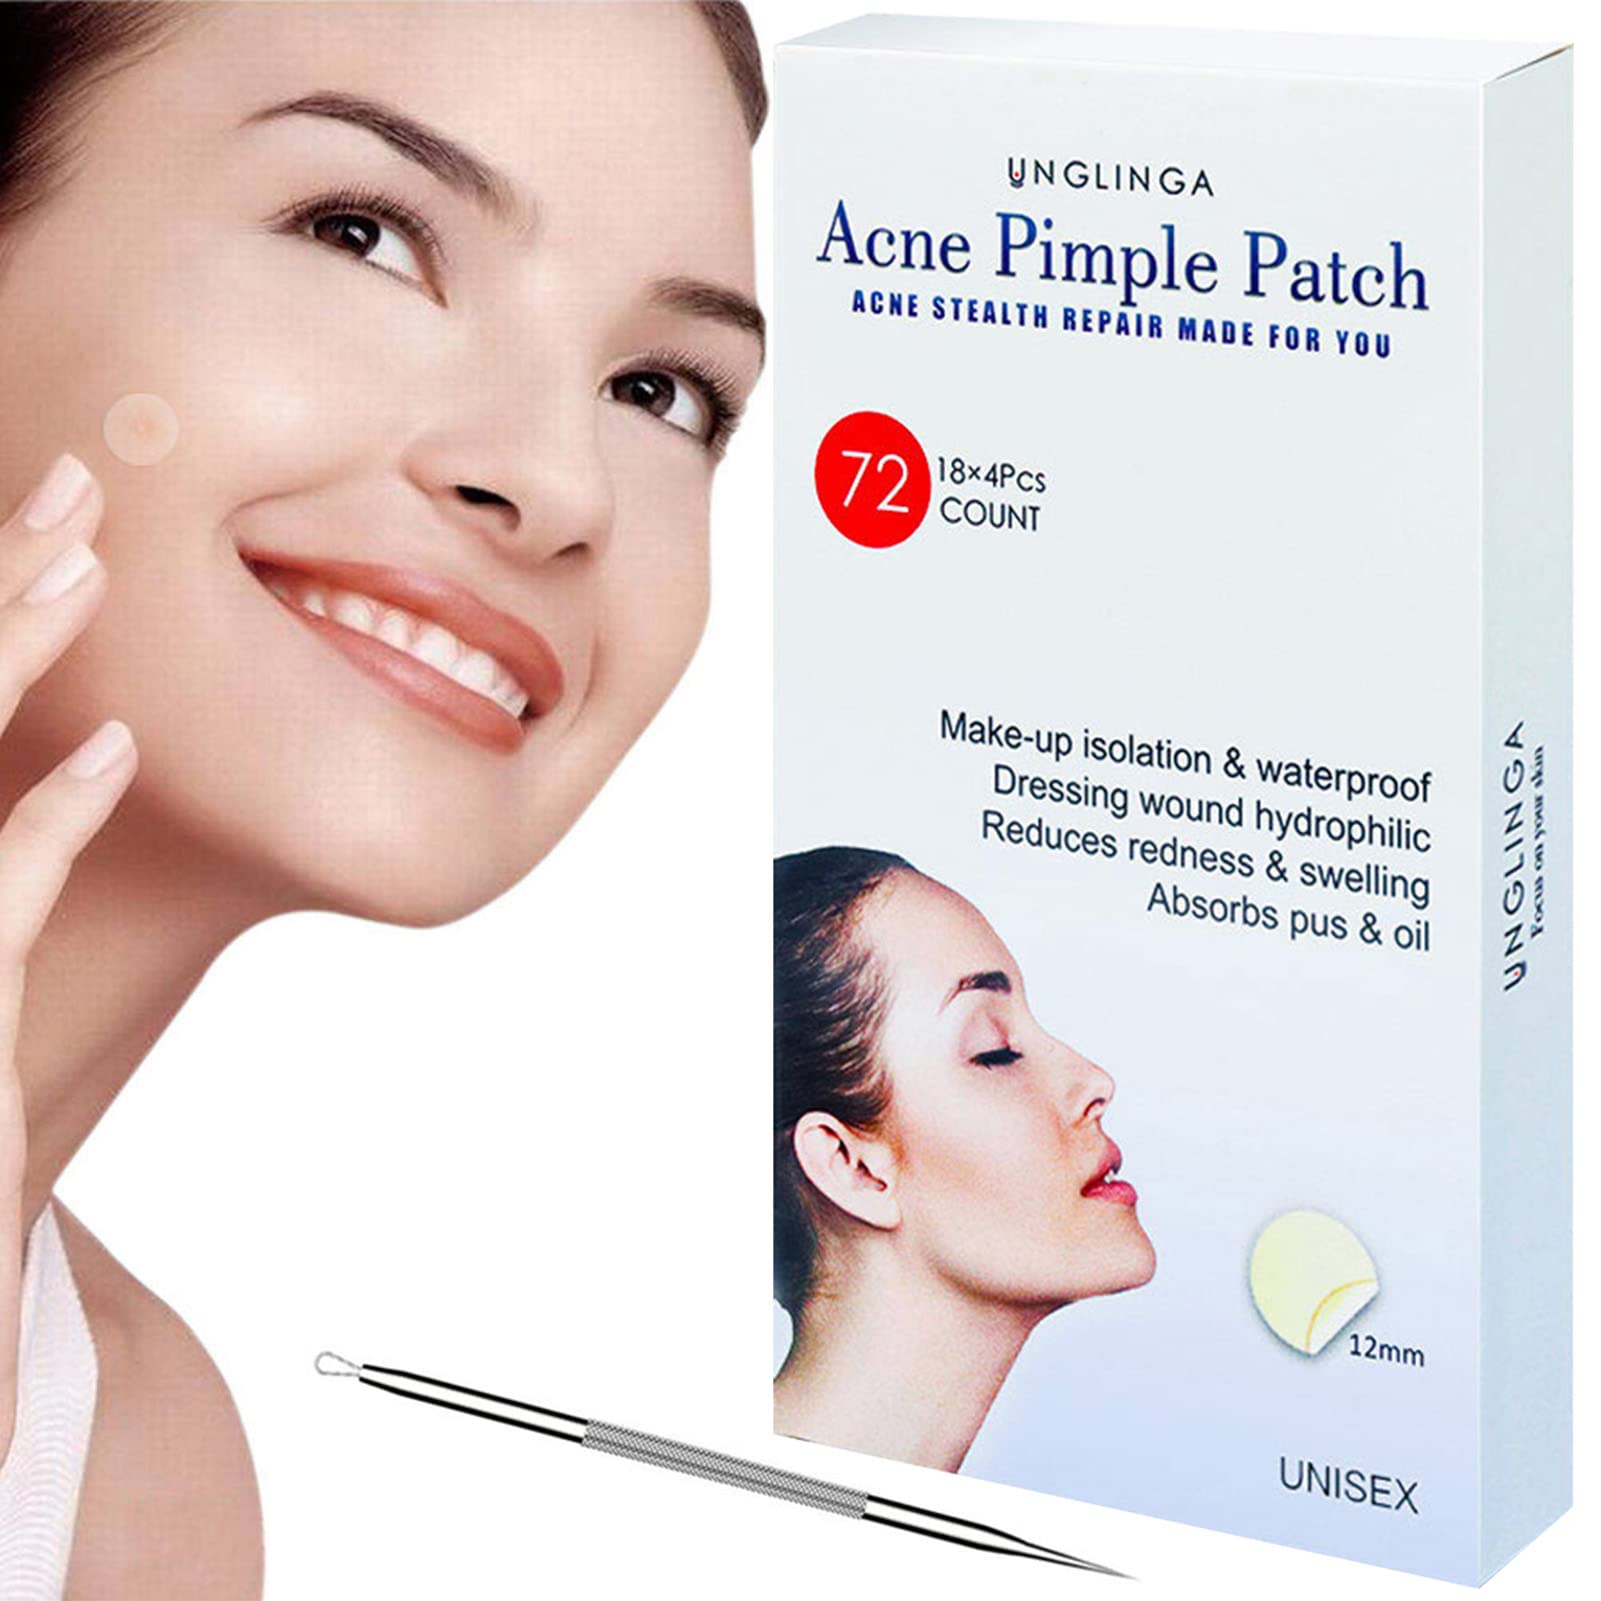 Acne Pimple Master Patch - 72Count Hydrocolloid Bandages Acne Spot Treatment Absorbing Zit Cover Healing Dots by UNGLINGA, Drug-free Non-drying, Φ12mm